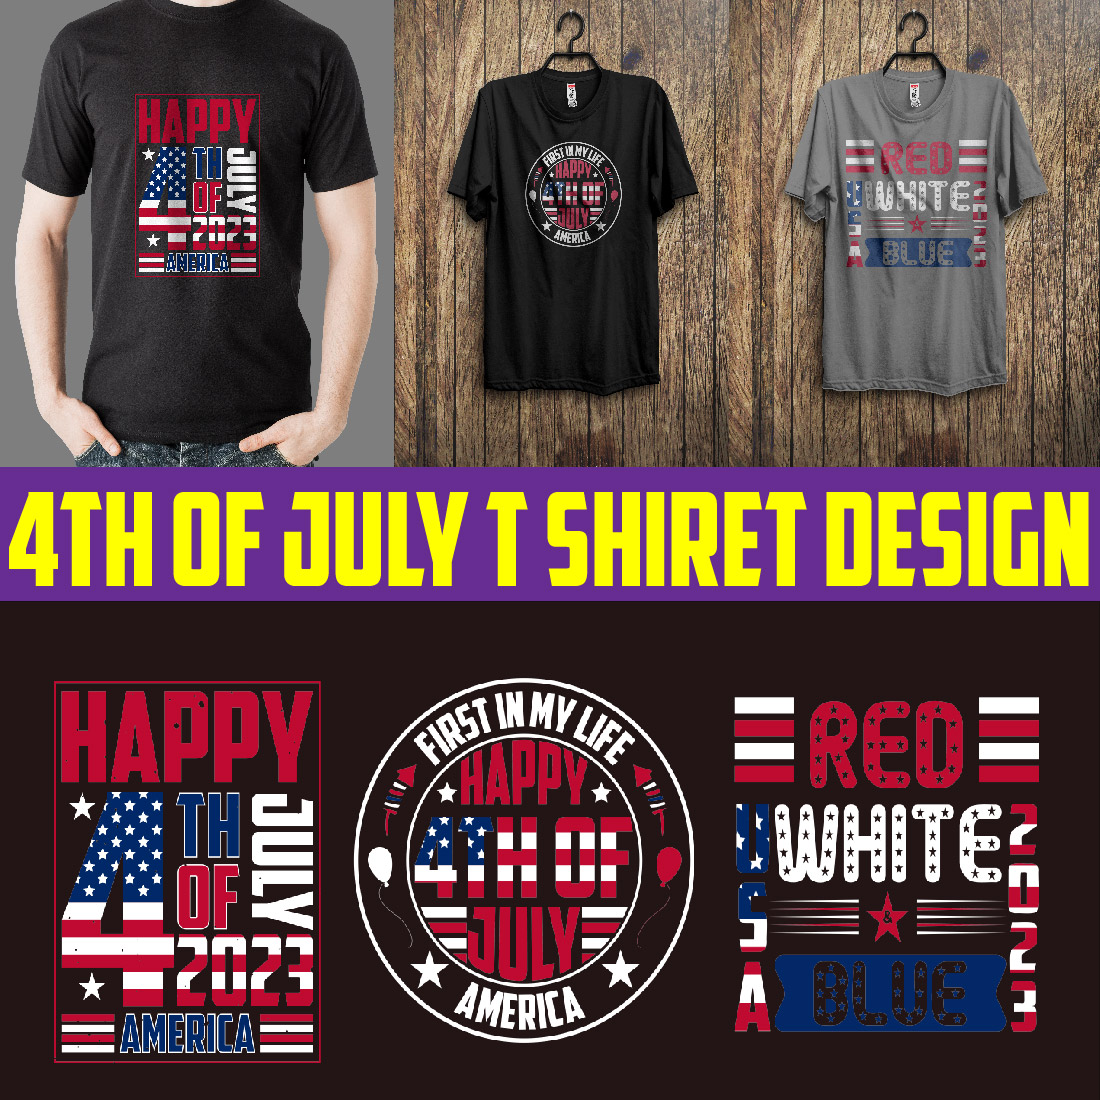 4TH OF JULY TYPOGRAPHY T SHIRT DESIGN cover image.